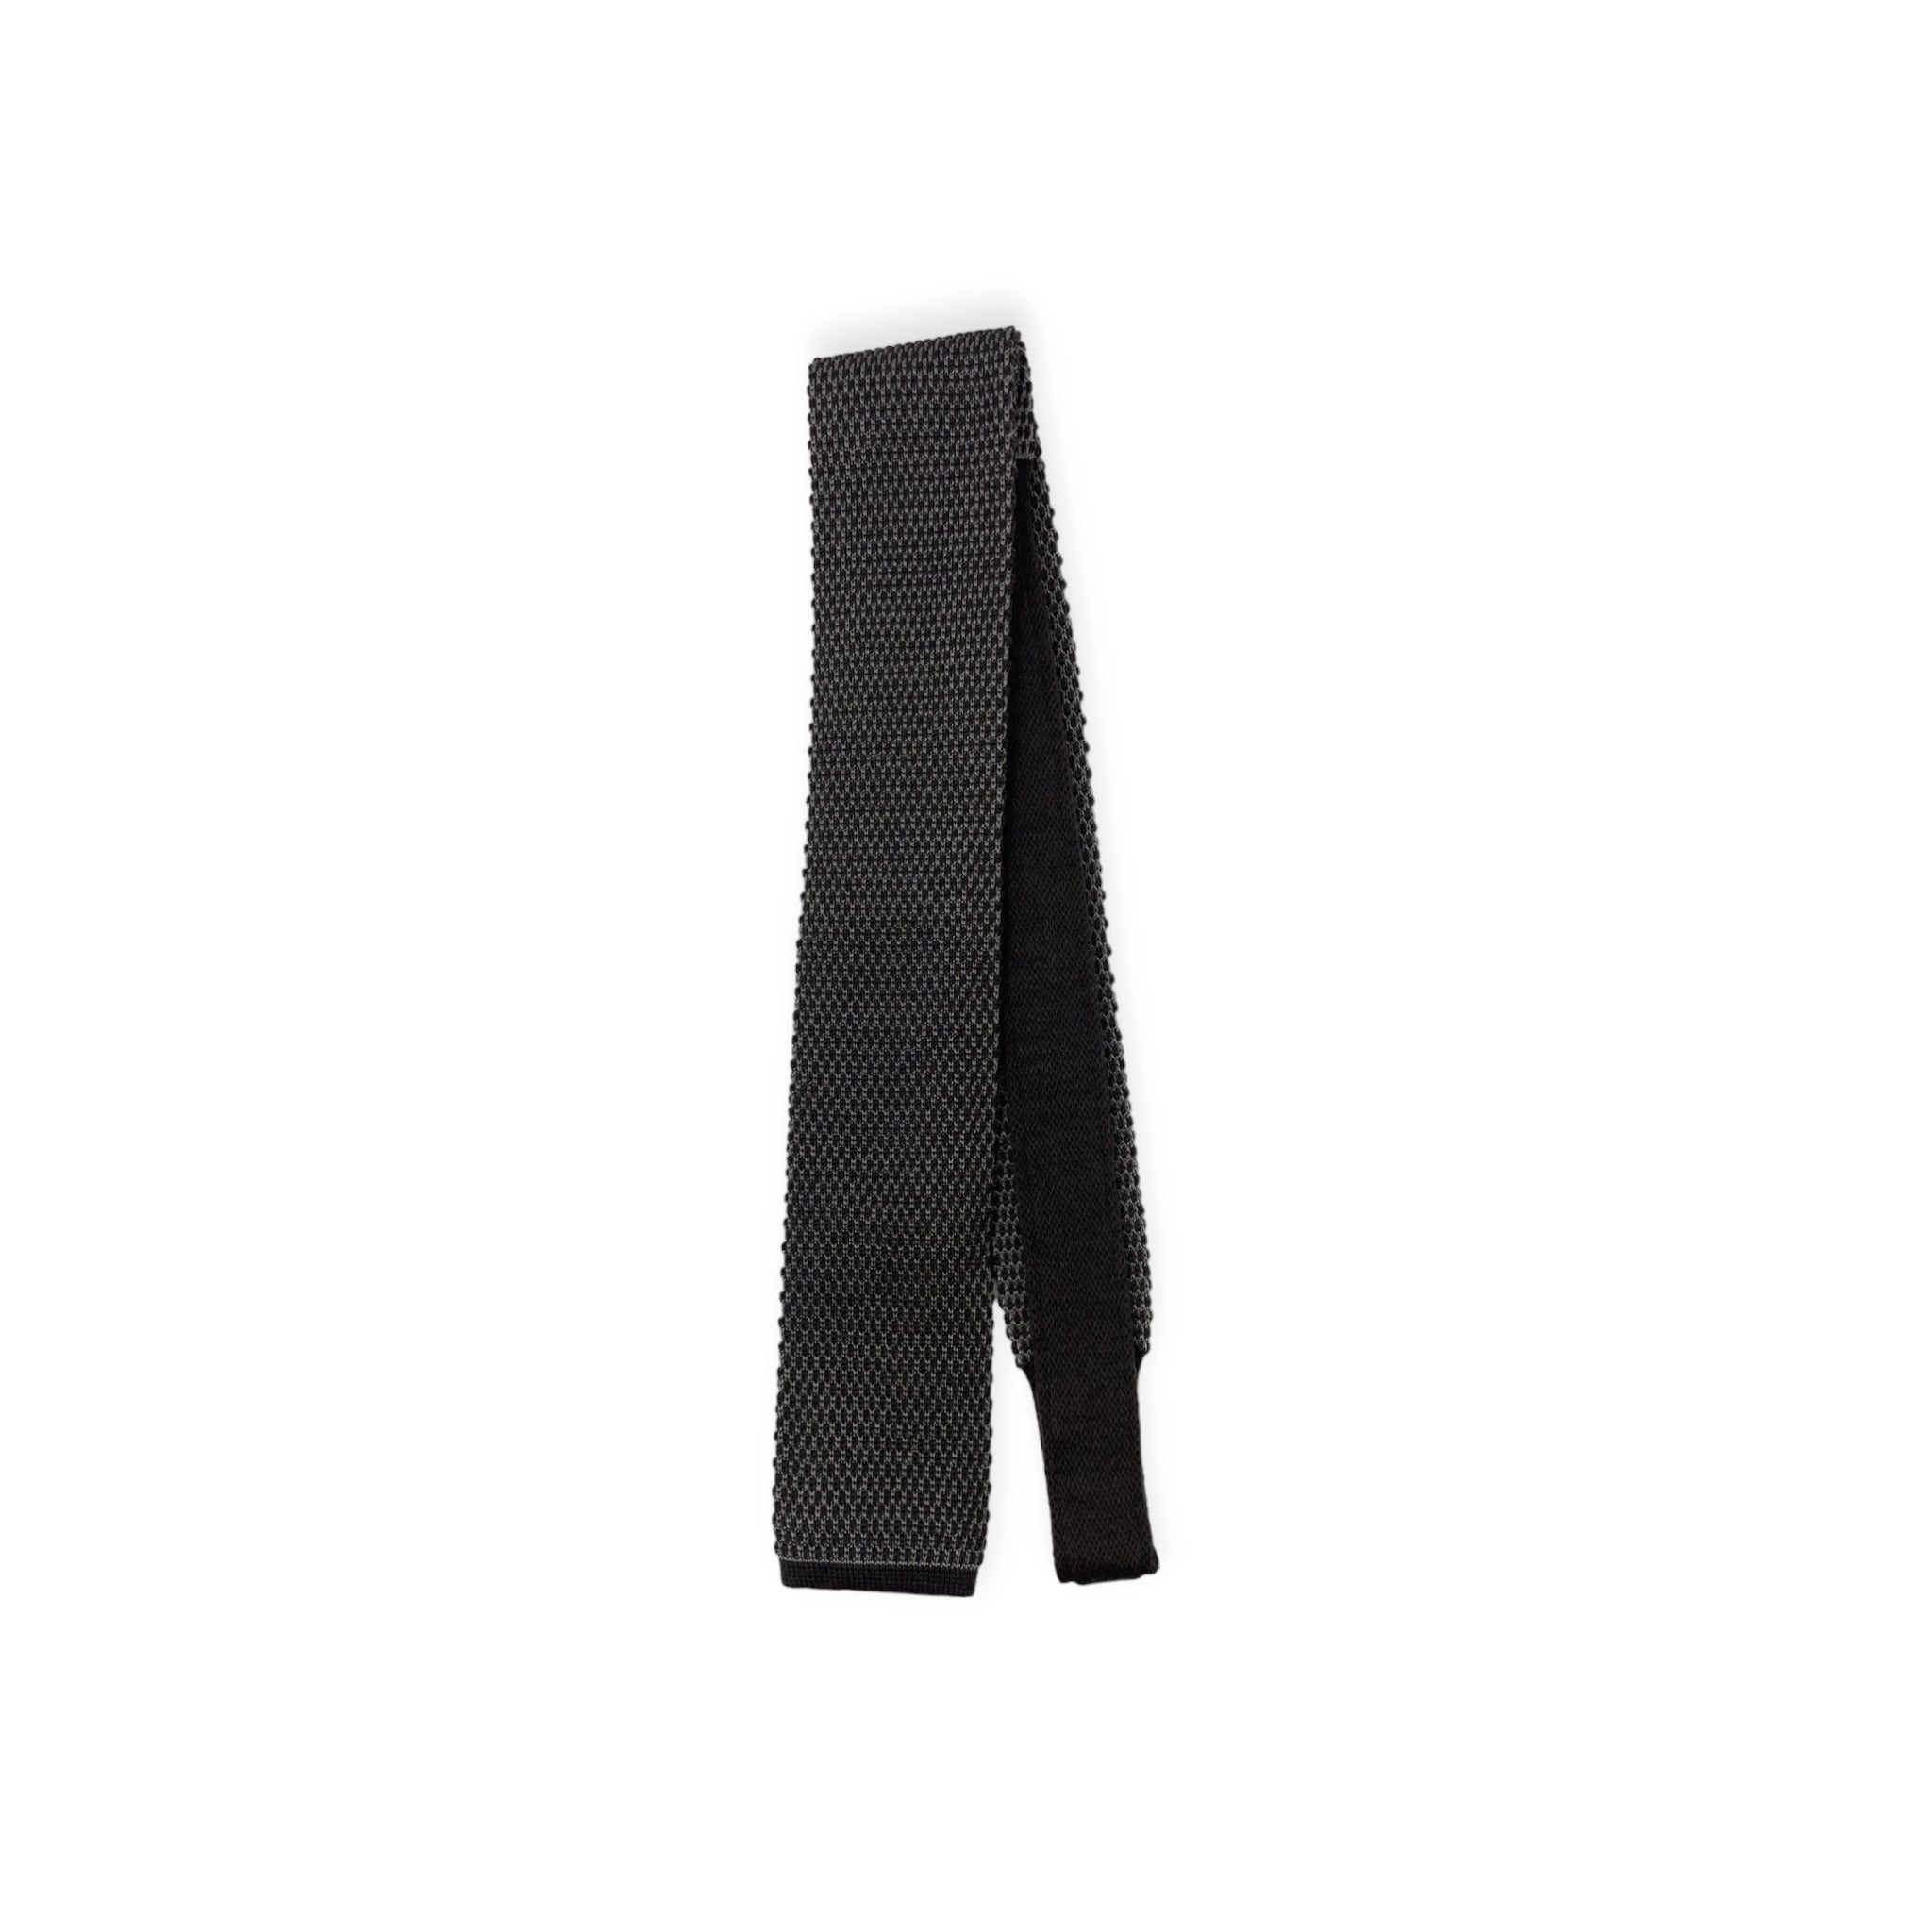 Top down view of back of black Brioni knit tricot tie